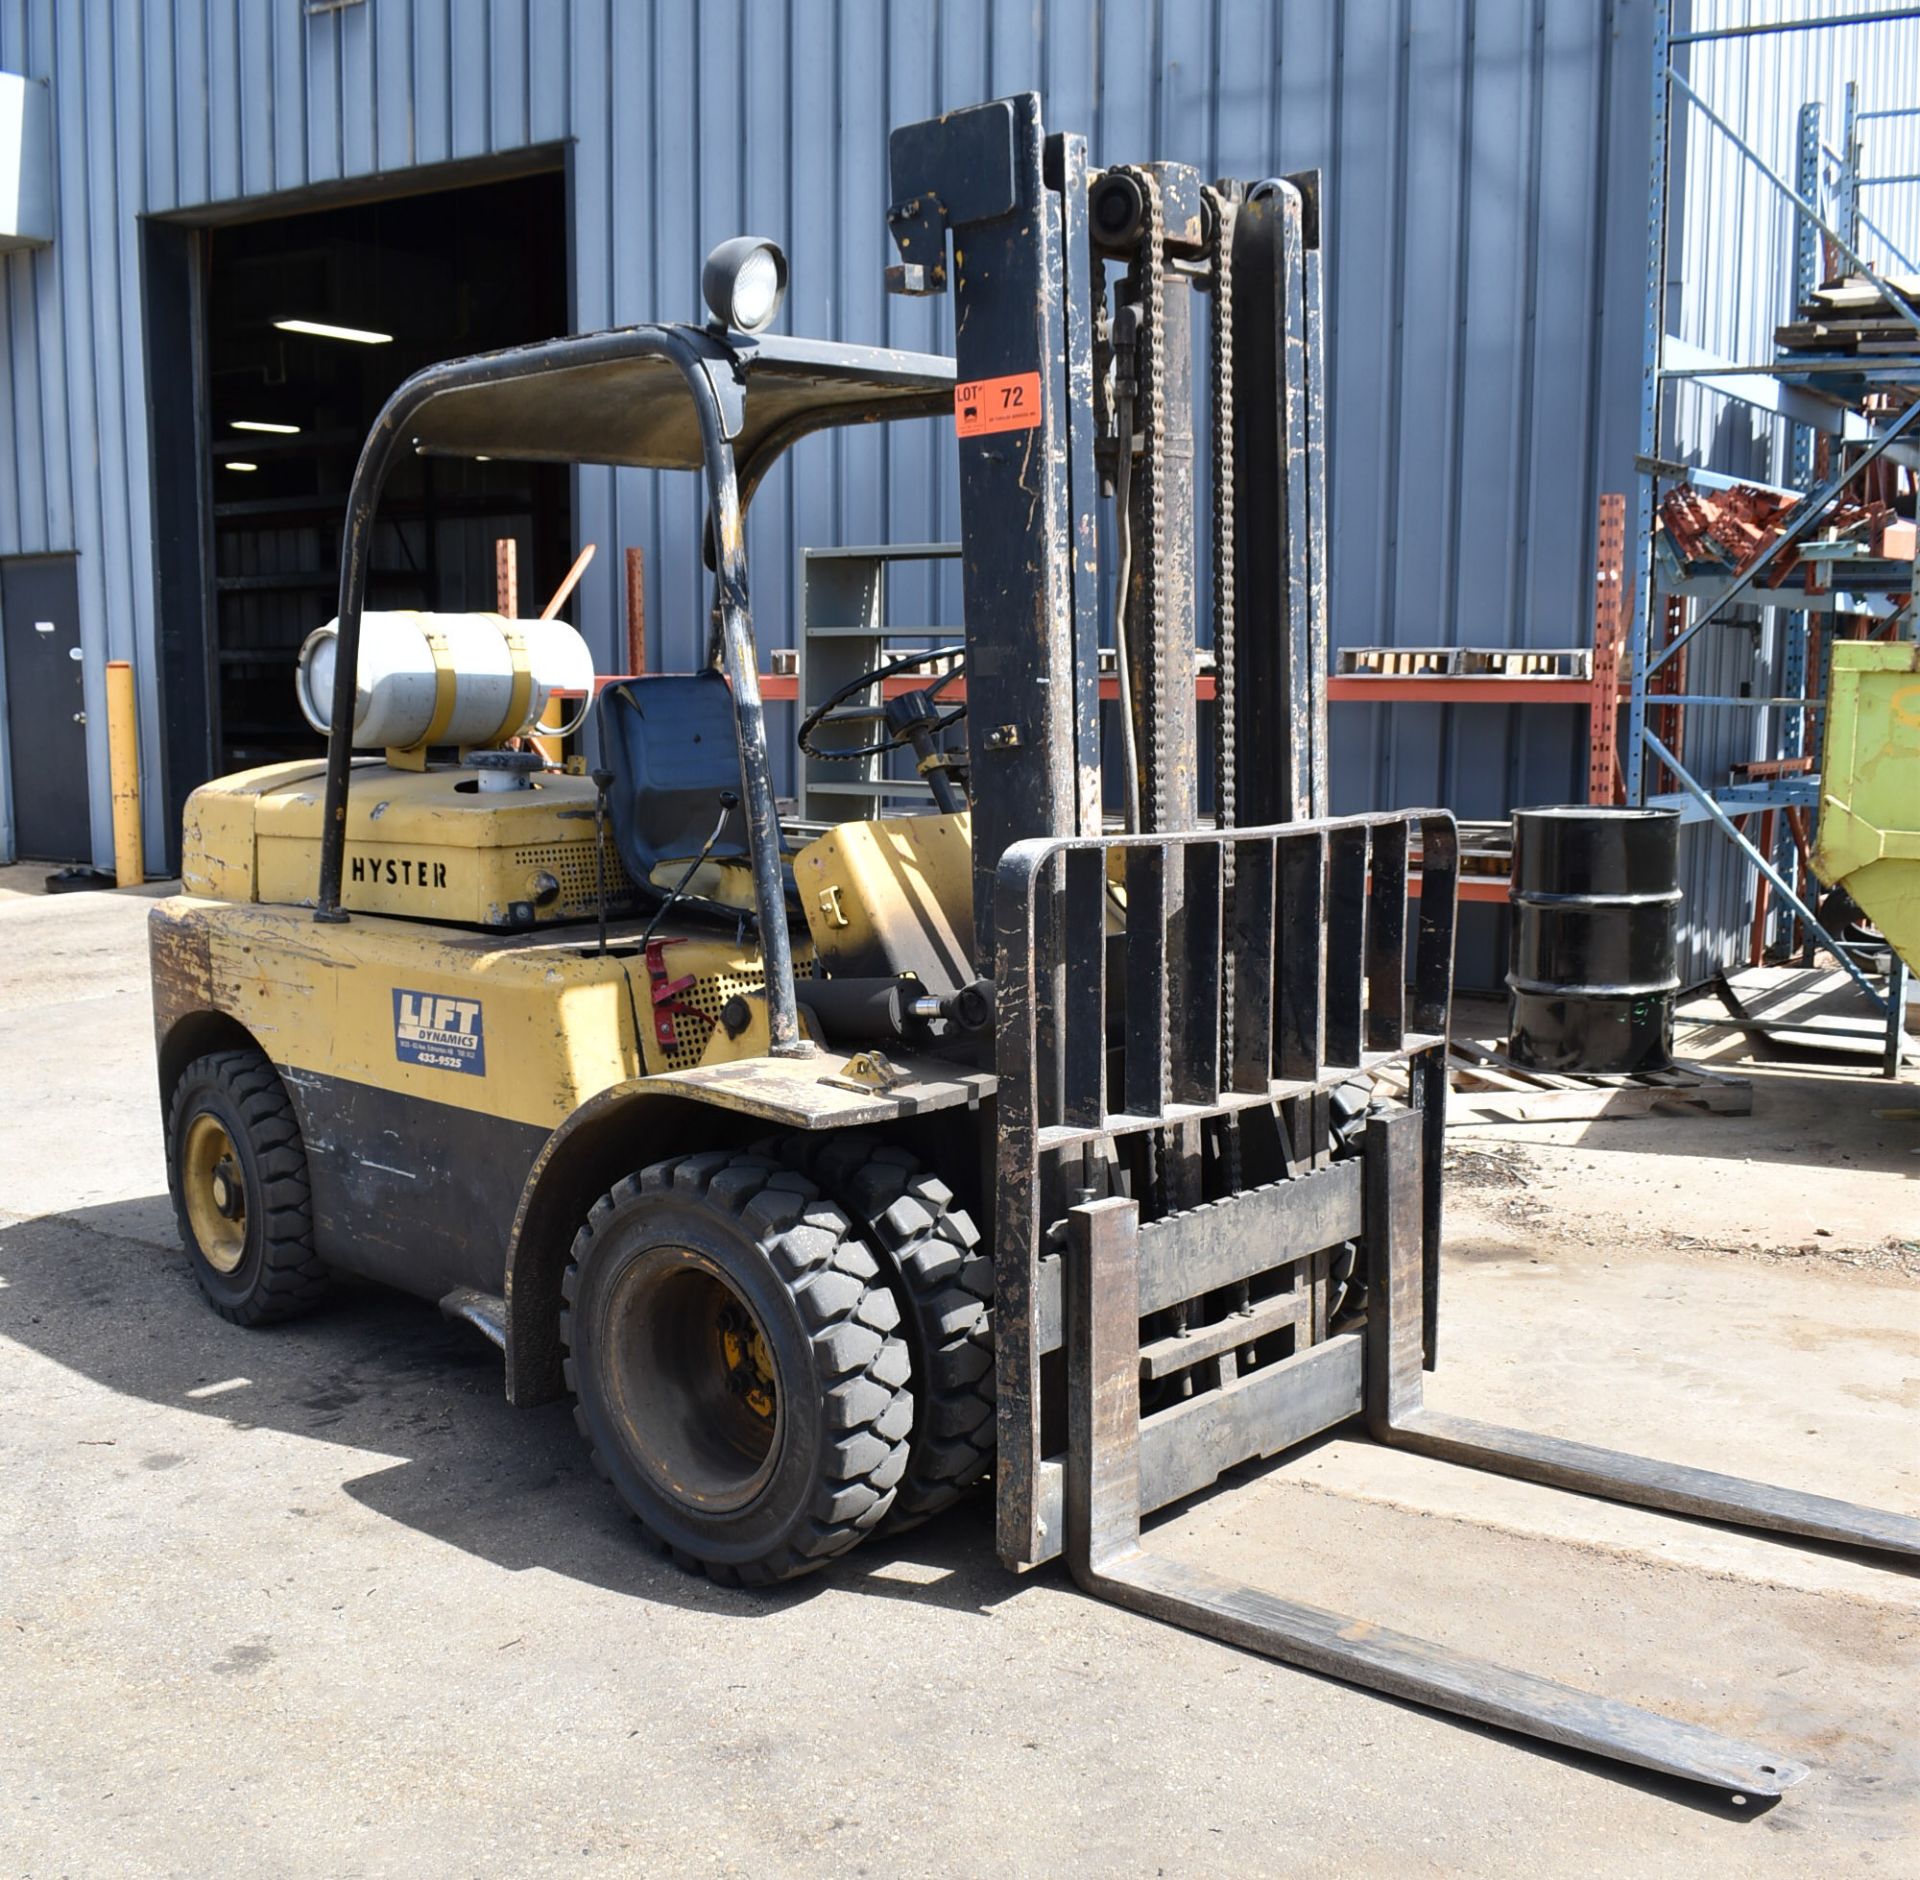 HYSTER H80C 8,000 LB. CAPACITY LPG FORKLIFT WITH 2-STAGE MAST, CUSHION TIRES, 4,798 HOURS (